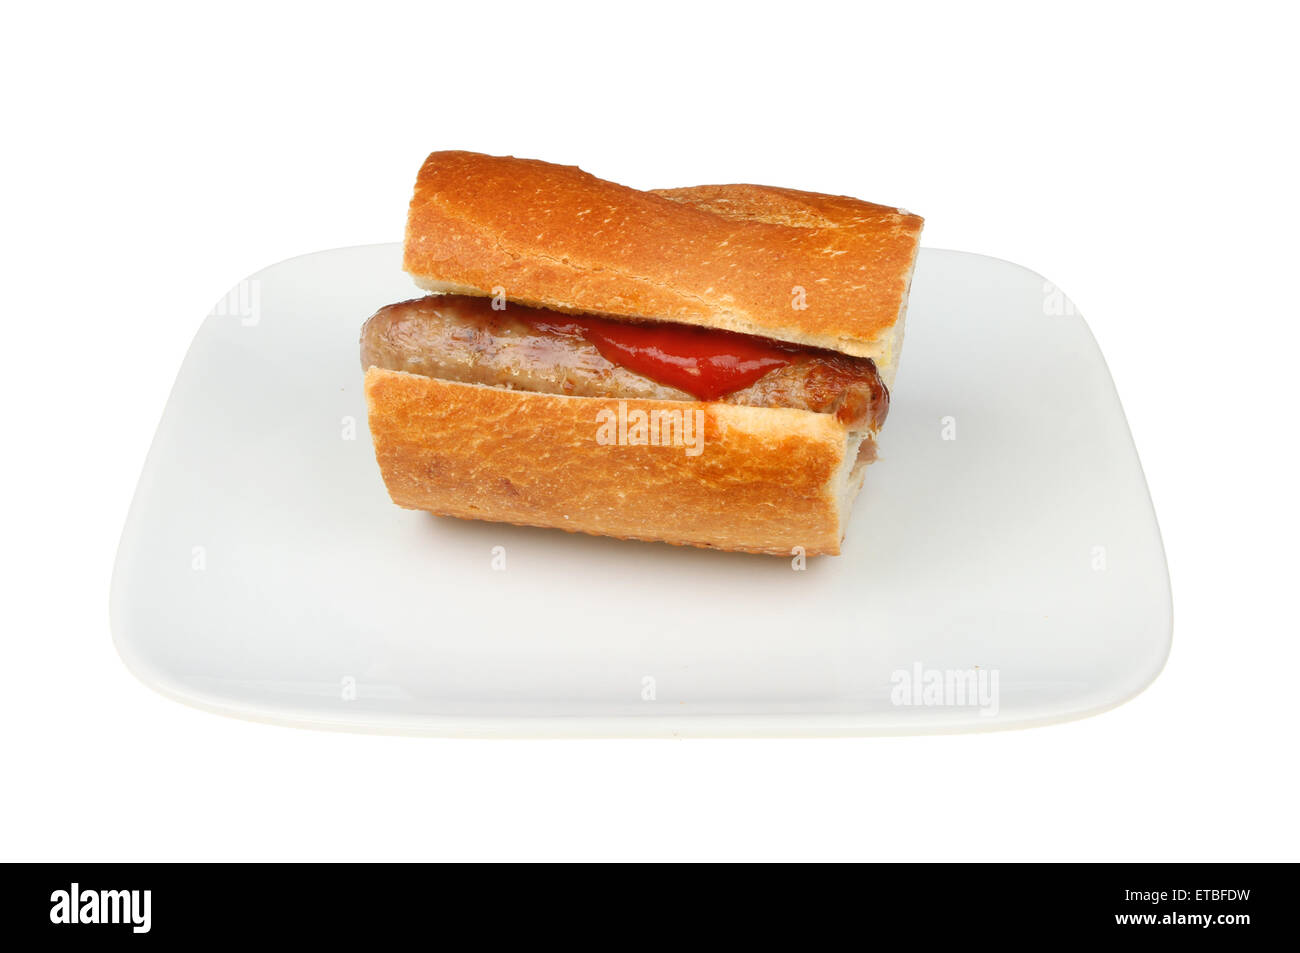 Disposable plates and forks with bread and ketchup Stock Photo - Alamy